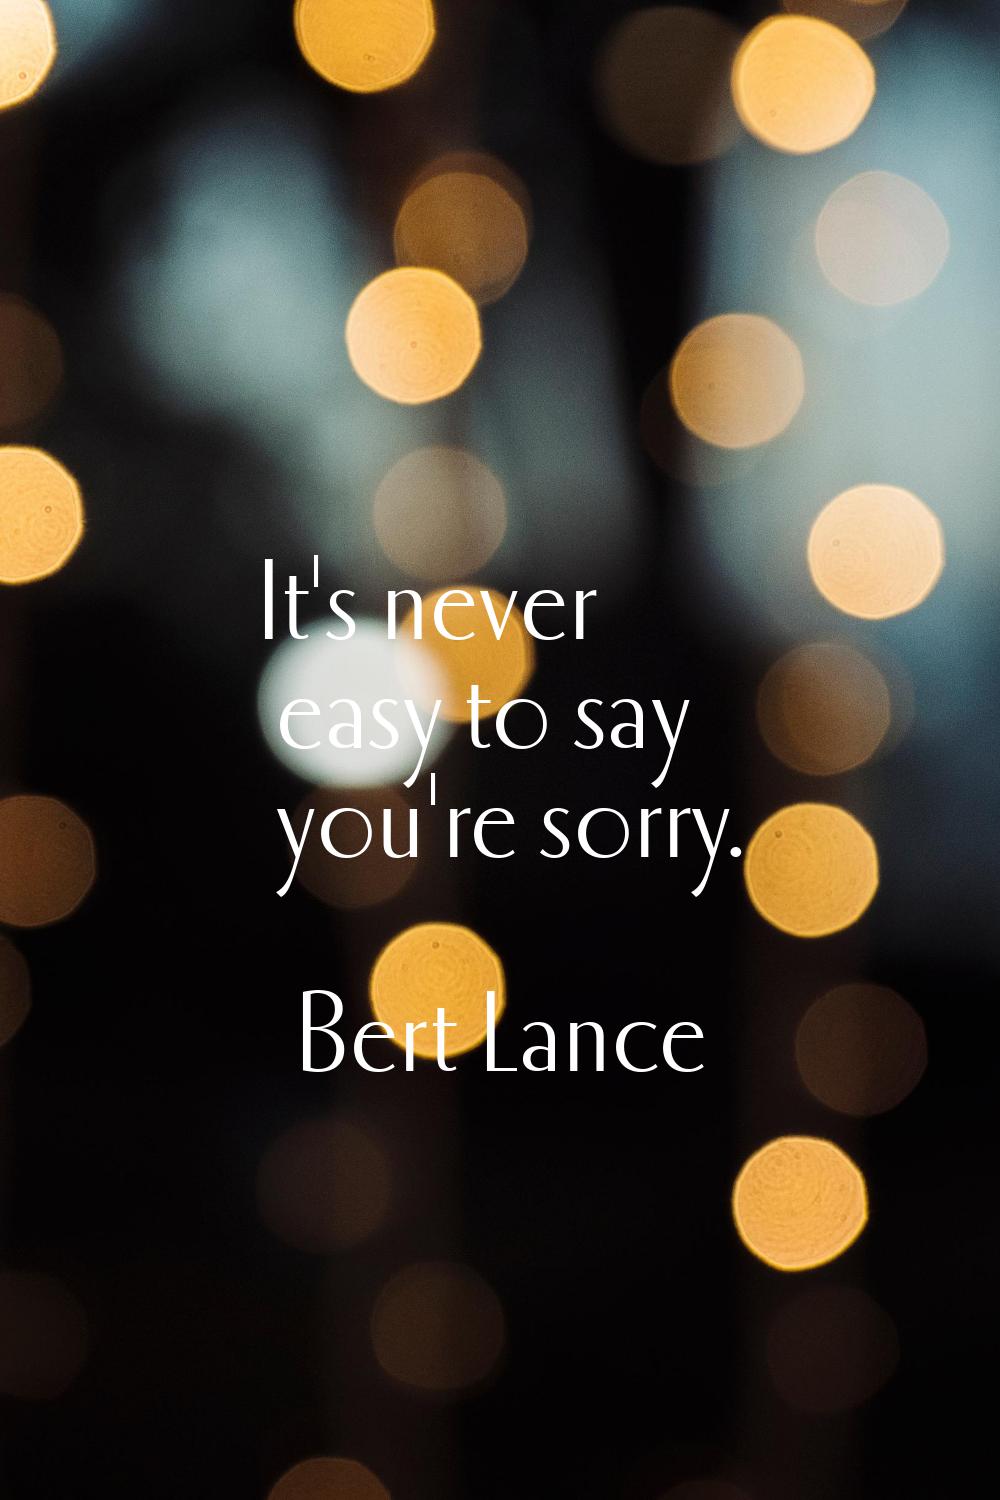 It's never easy to say you're sorry.